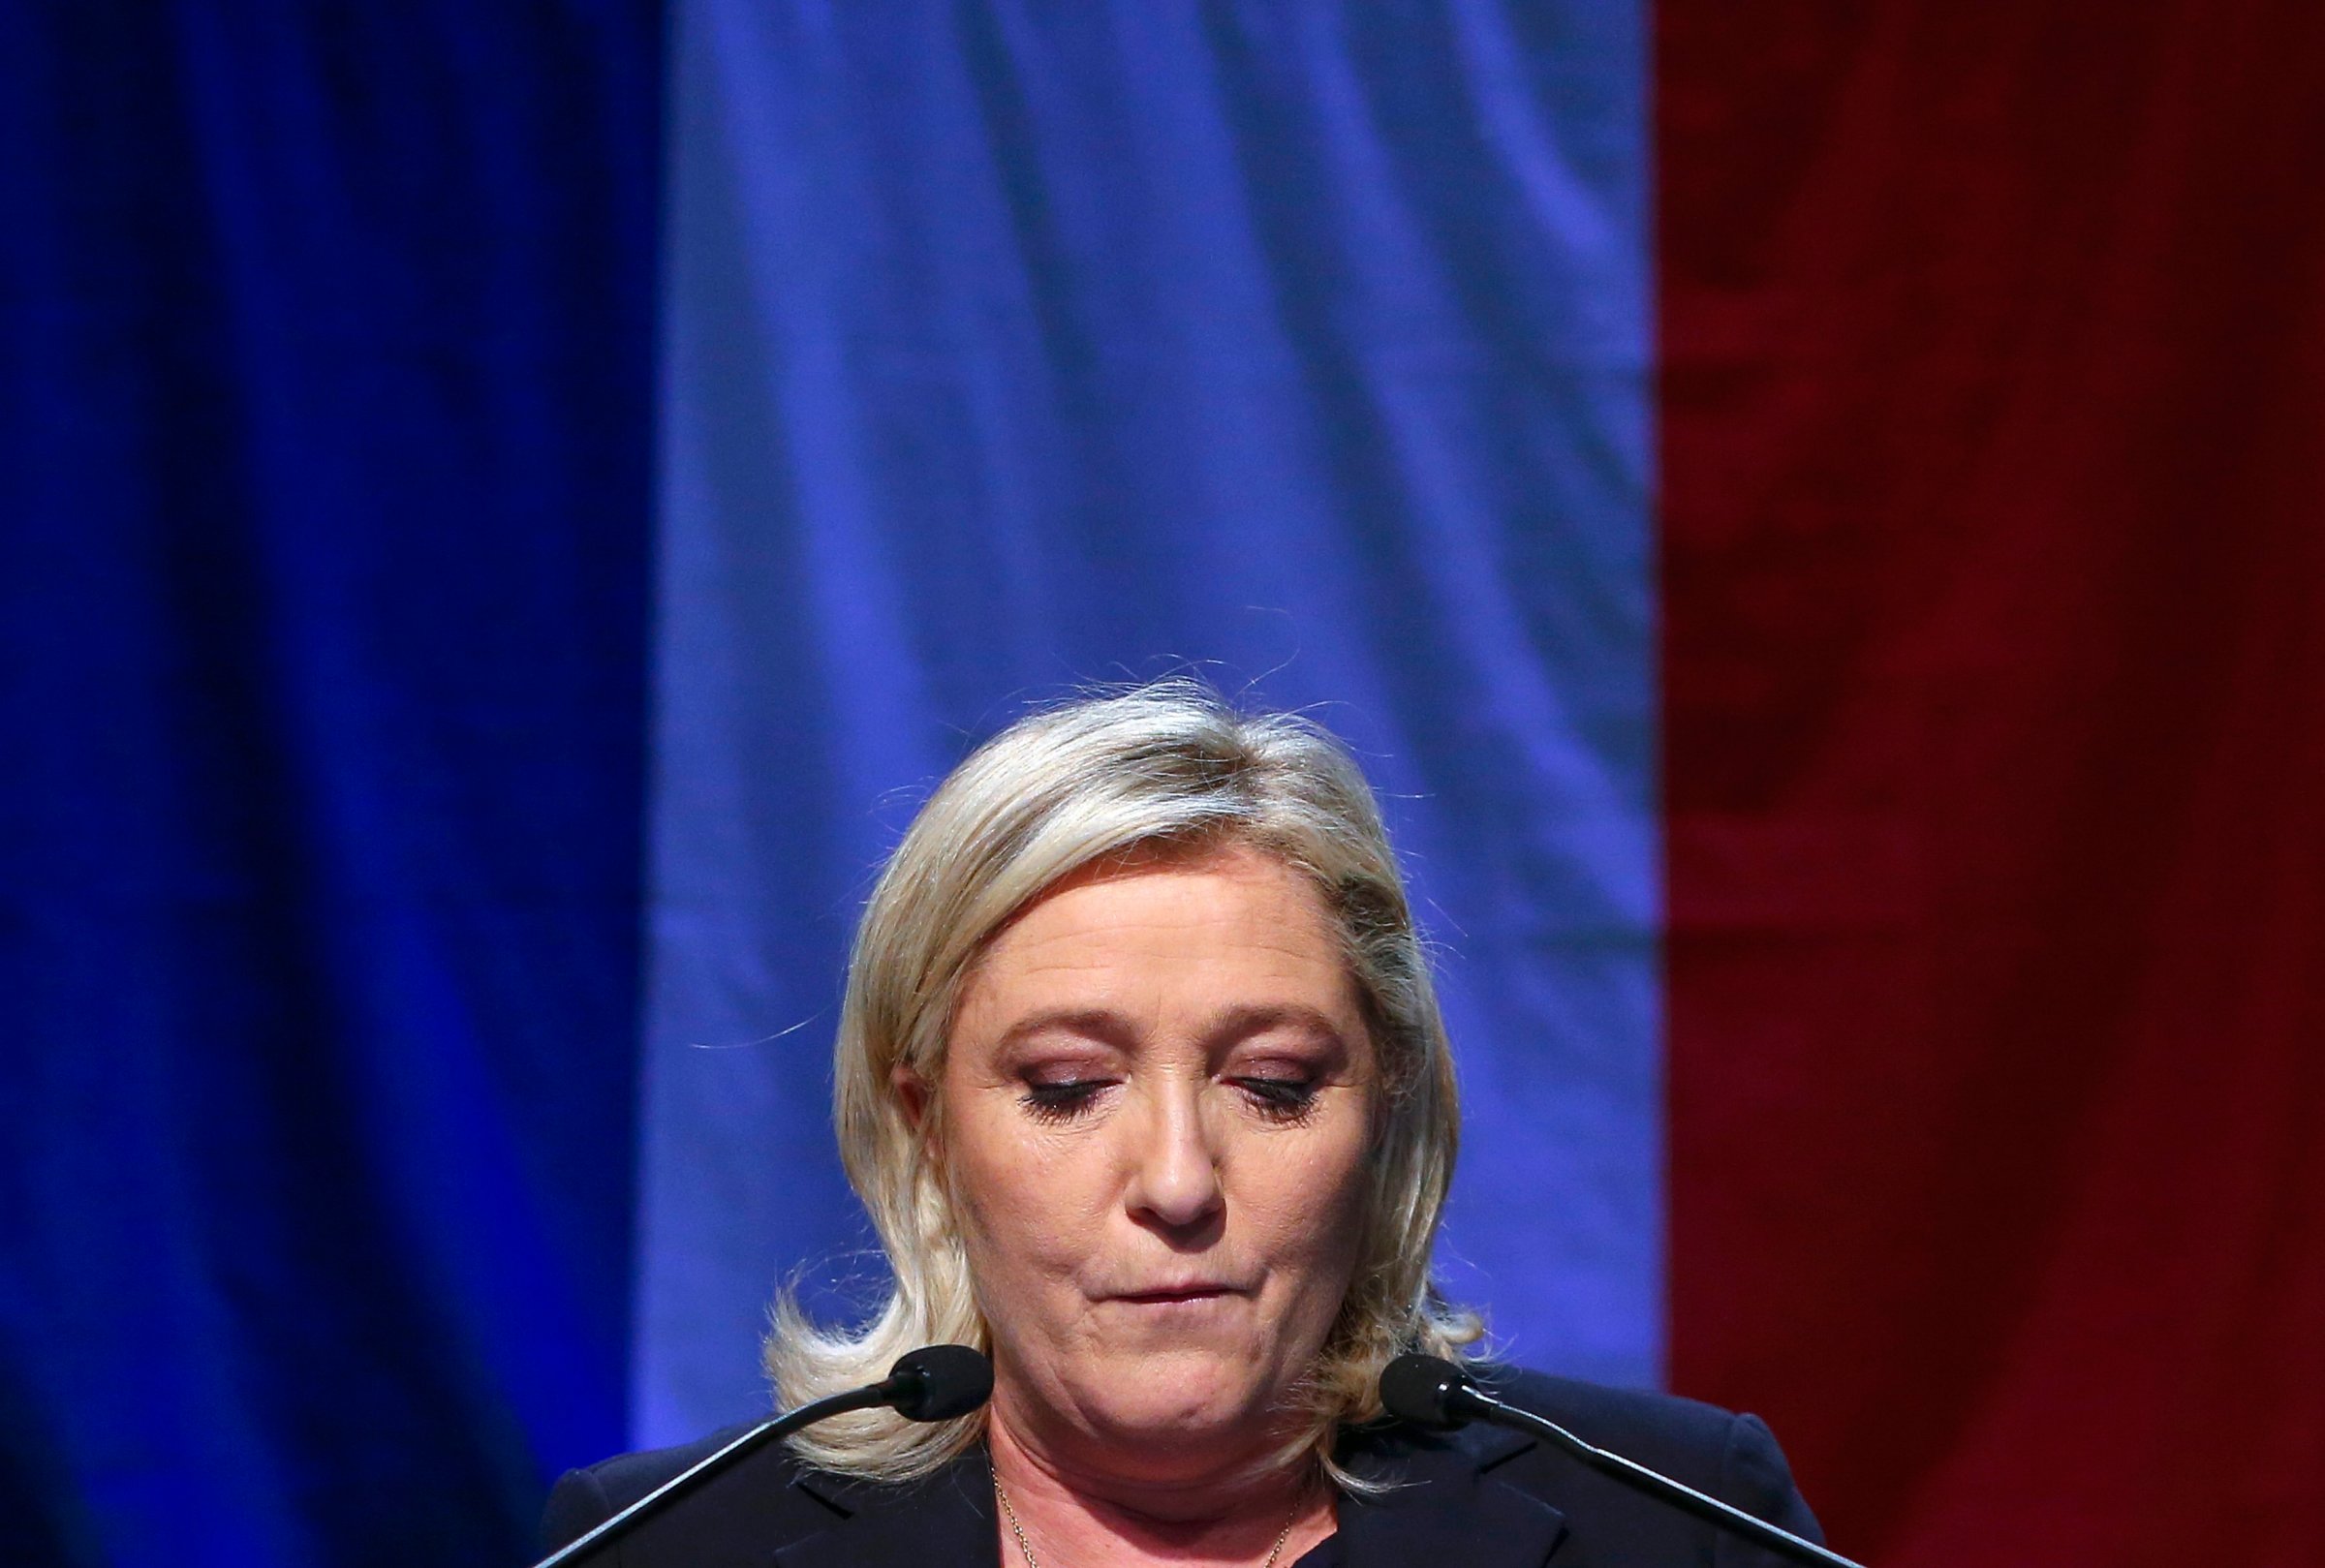 Marine Le Pen, French National Front political party leader and candidate for the National Front in the Nord-Pas-de-Calais-Picardie region, delivers a speech after results in the second-round regional elections in Henin-Beaumont.